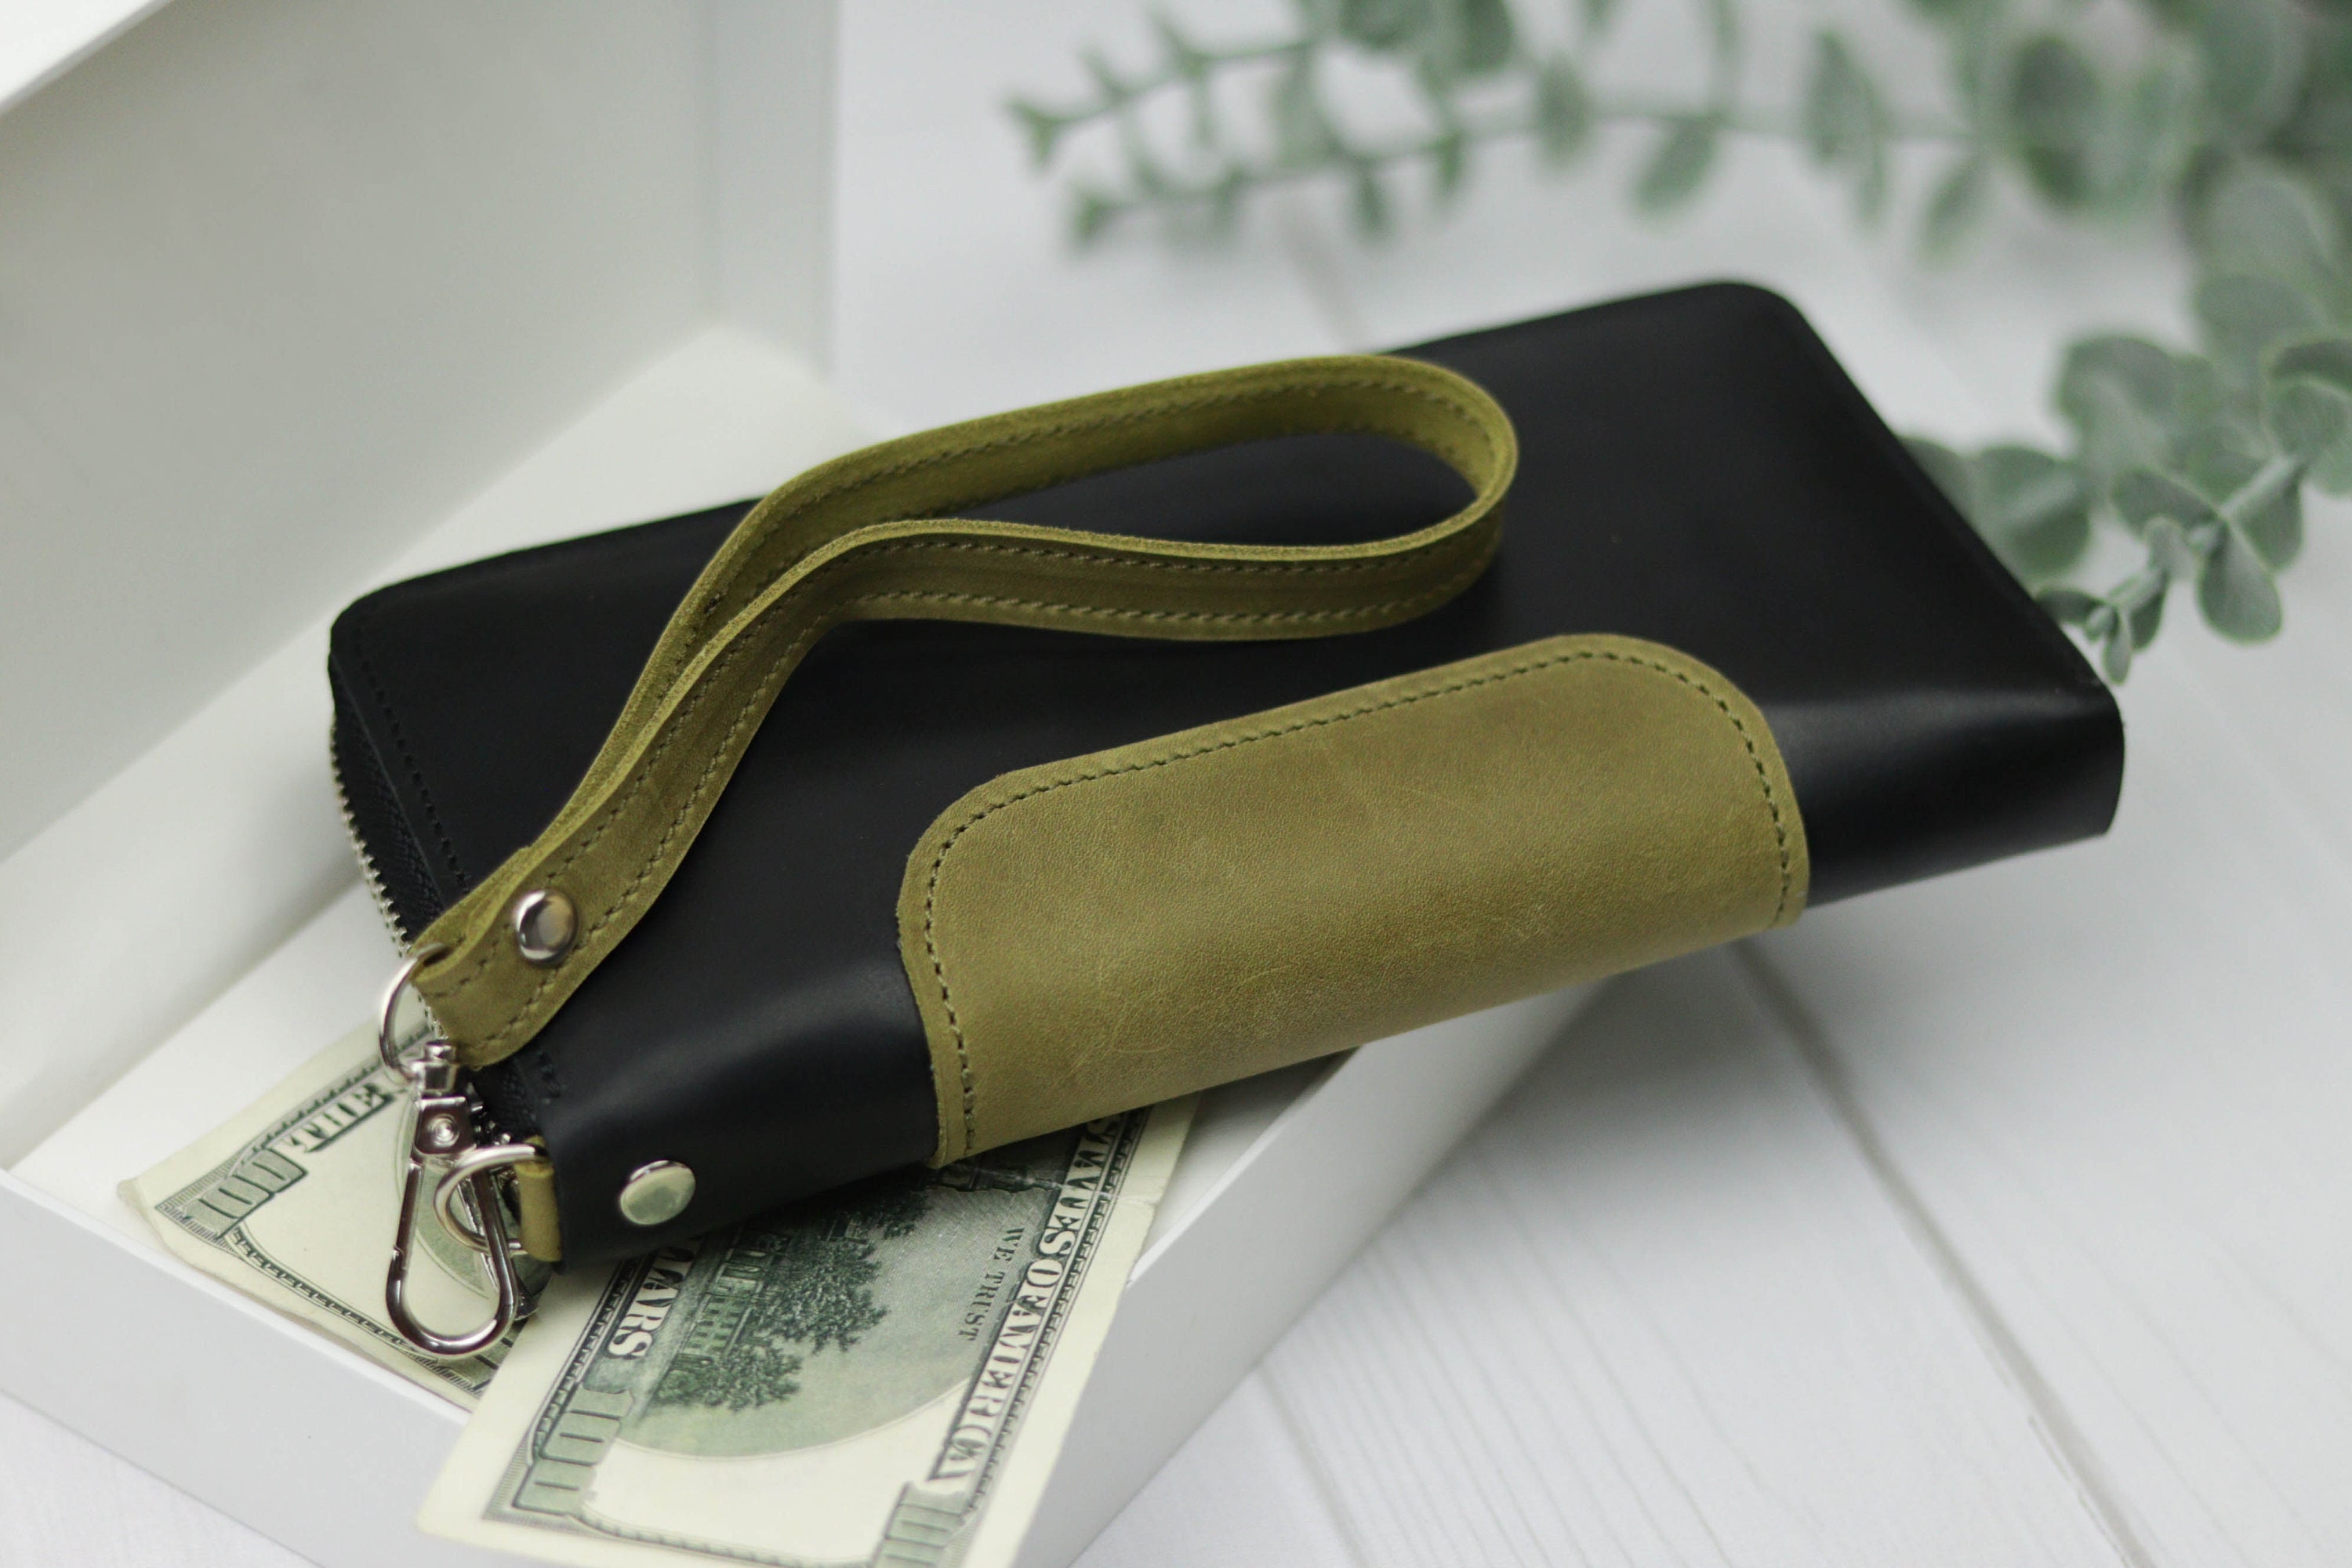 The Cael Handmade Leather Coin Purse